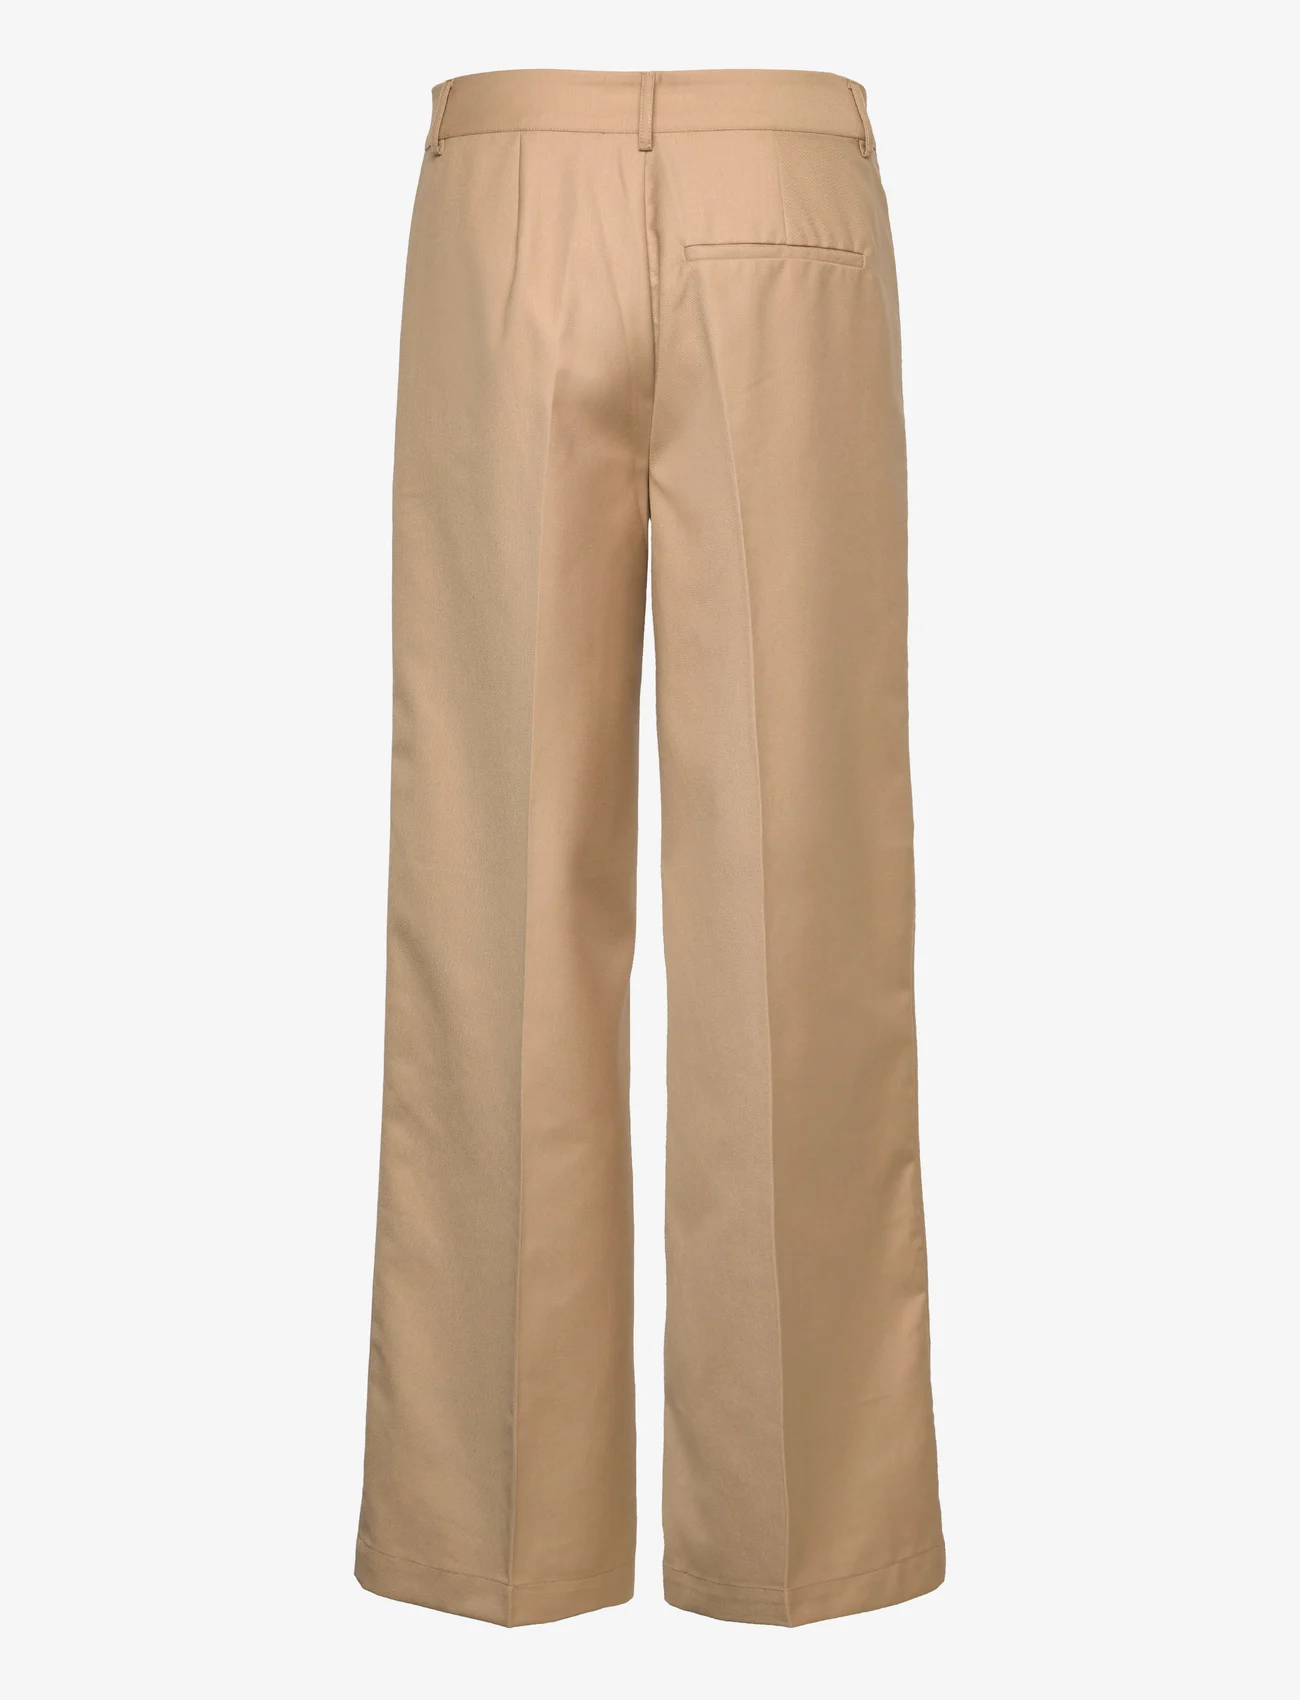 Sofie Schnoor - Trousers - wide leg trousers - camel - 1